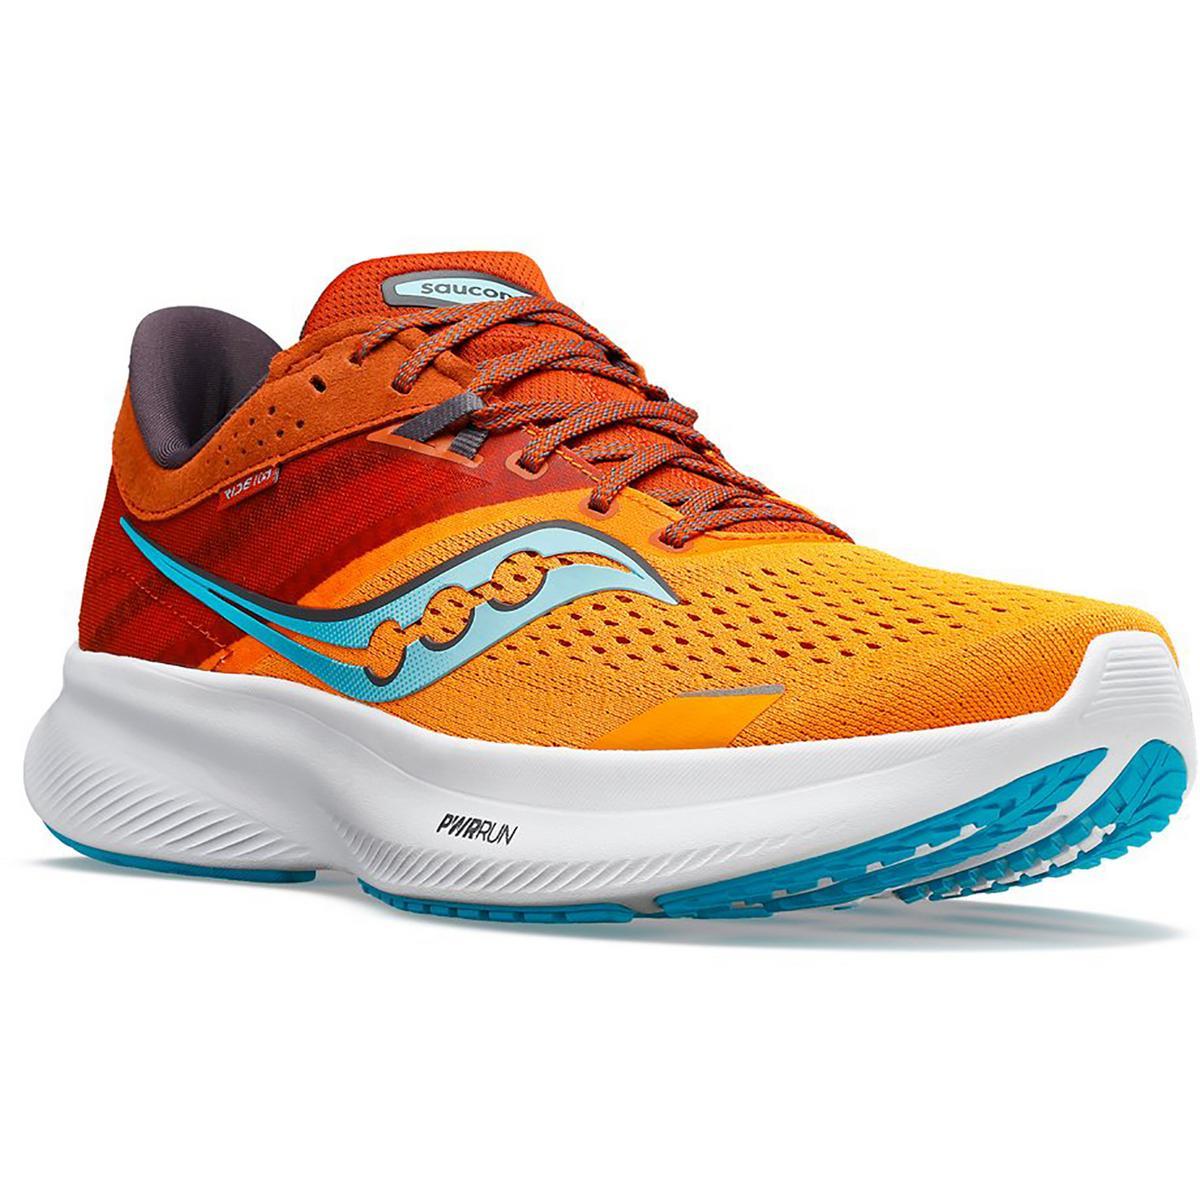 Saucony Mens Ride 16 Fitness Workout Running Training Shoes Sneakers Bhfo 2879 Marigold/Lava/Orange